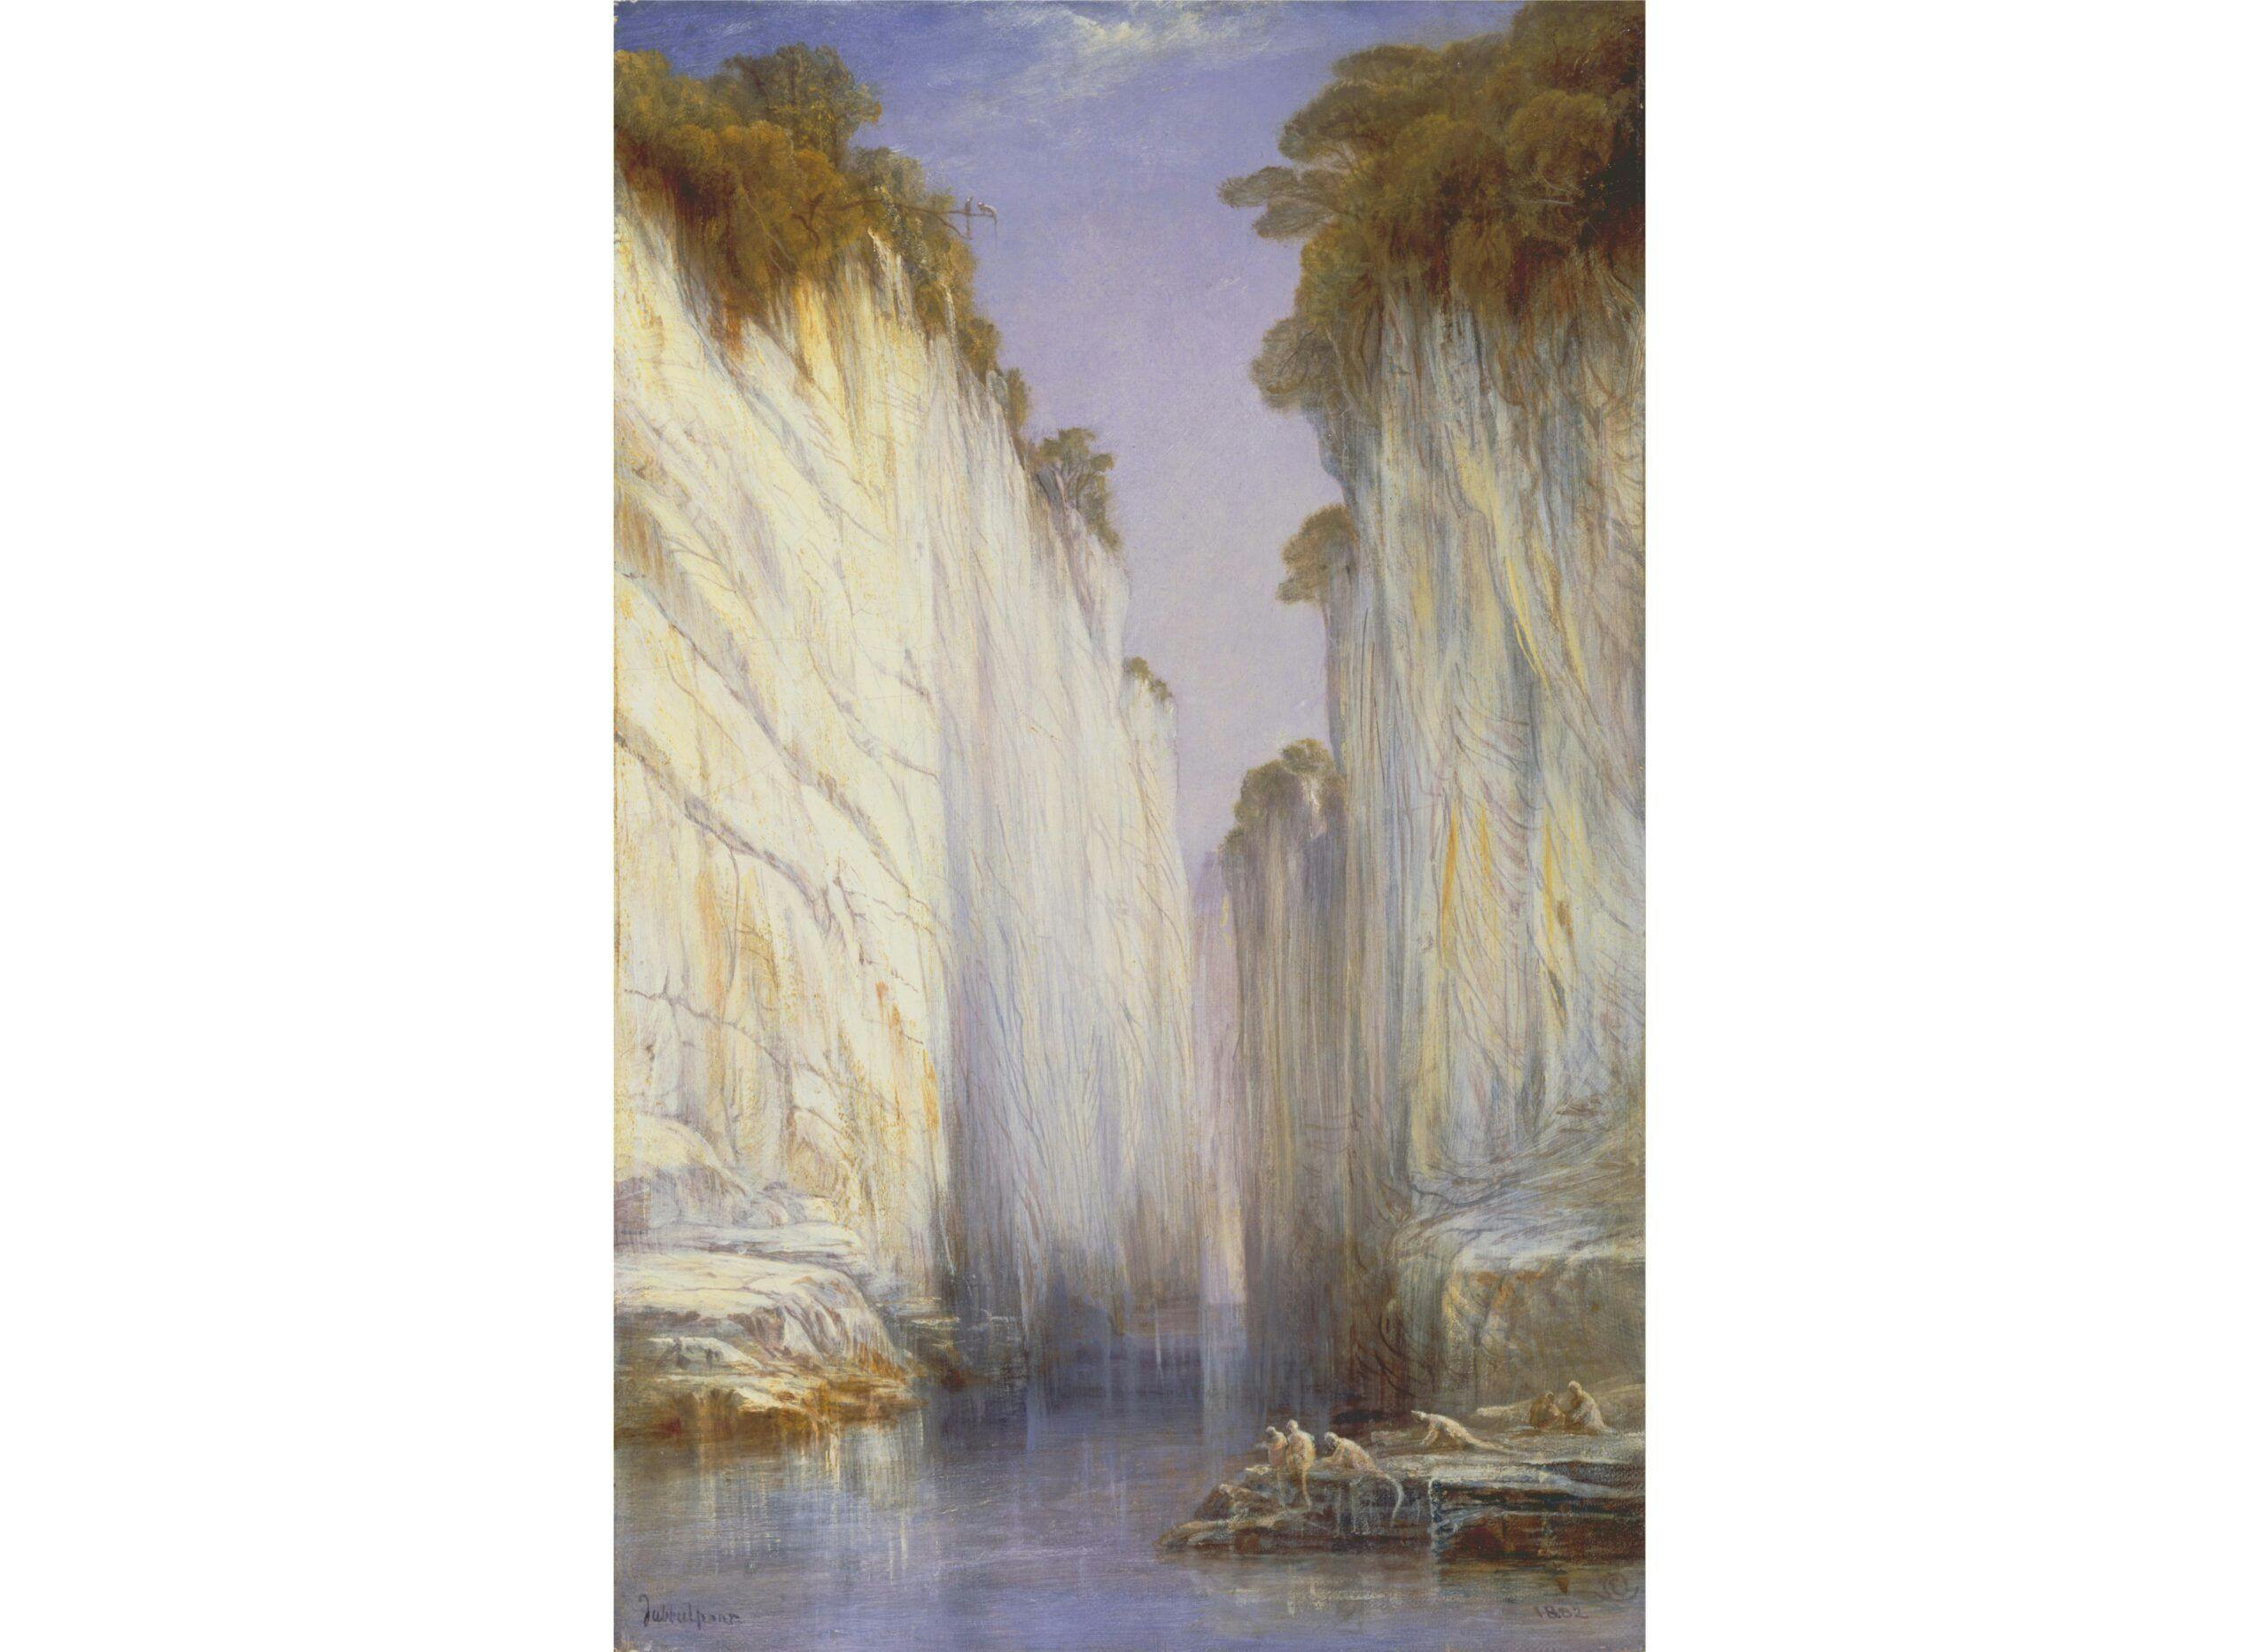 A painting of the Marble Rocks by Edward Lear 